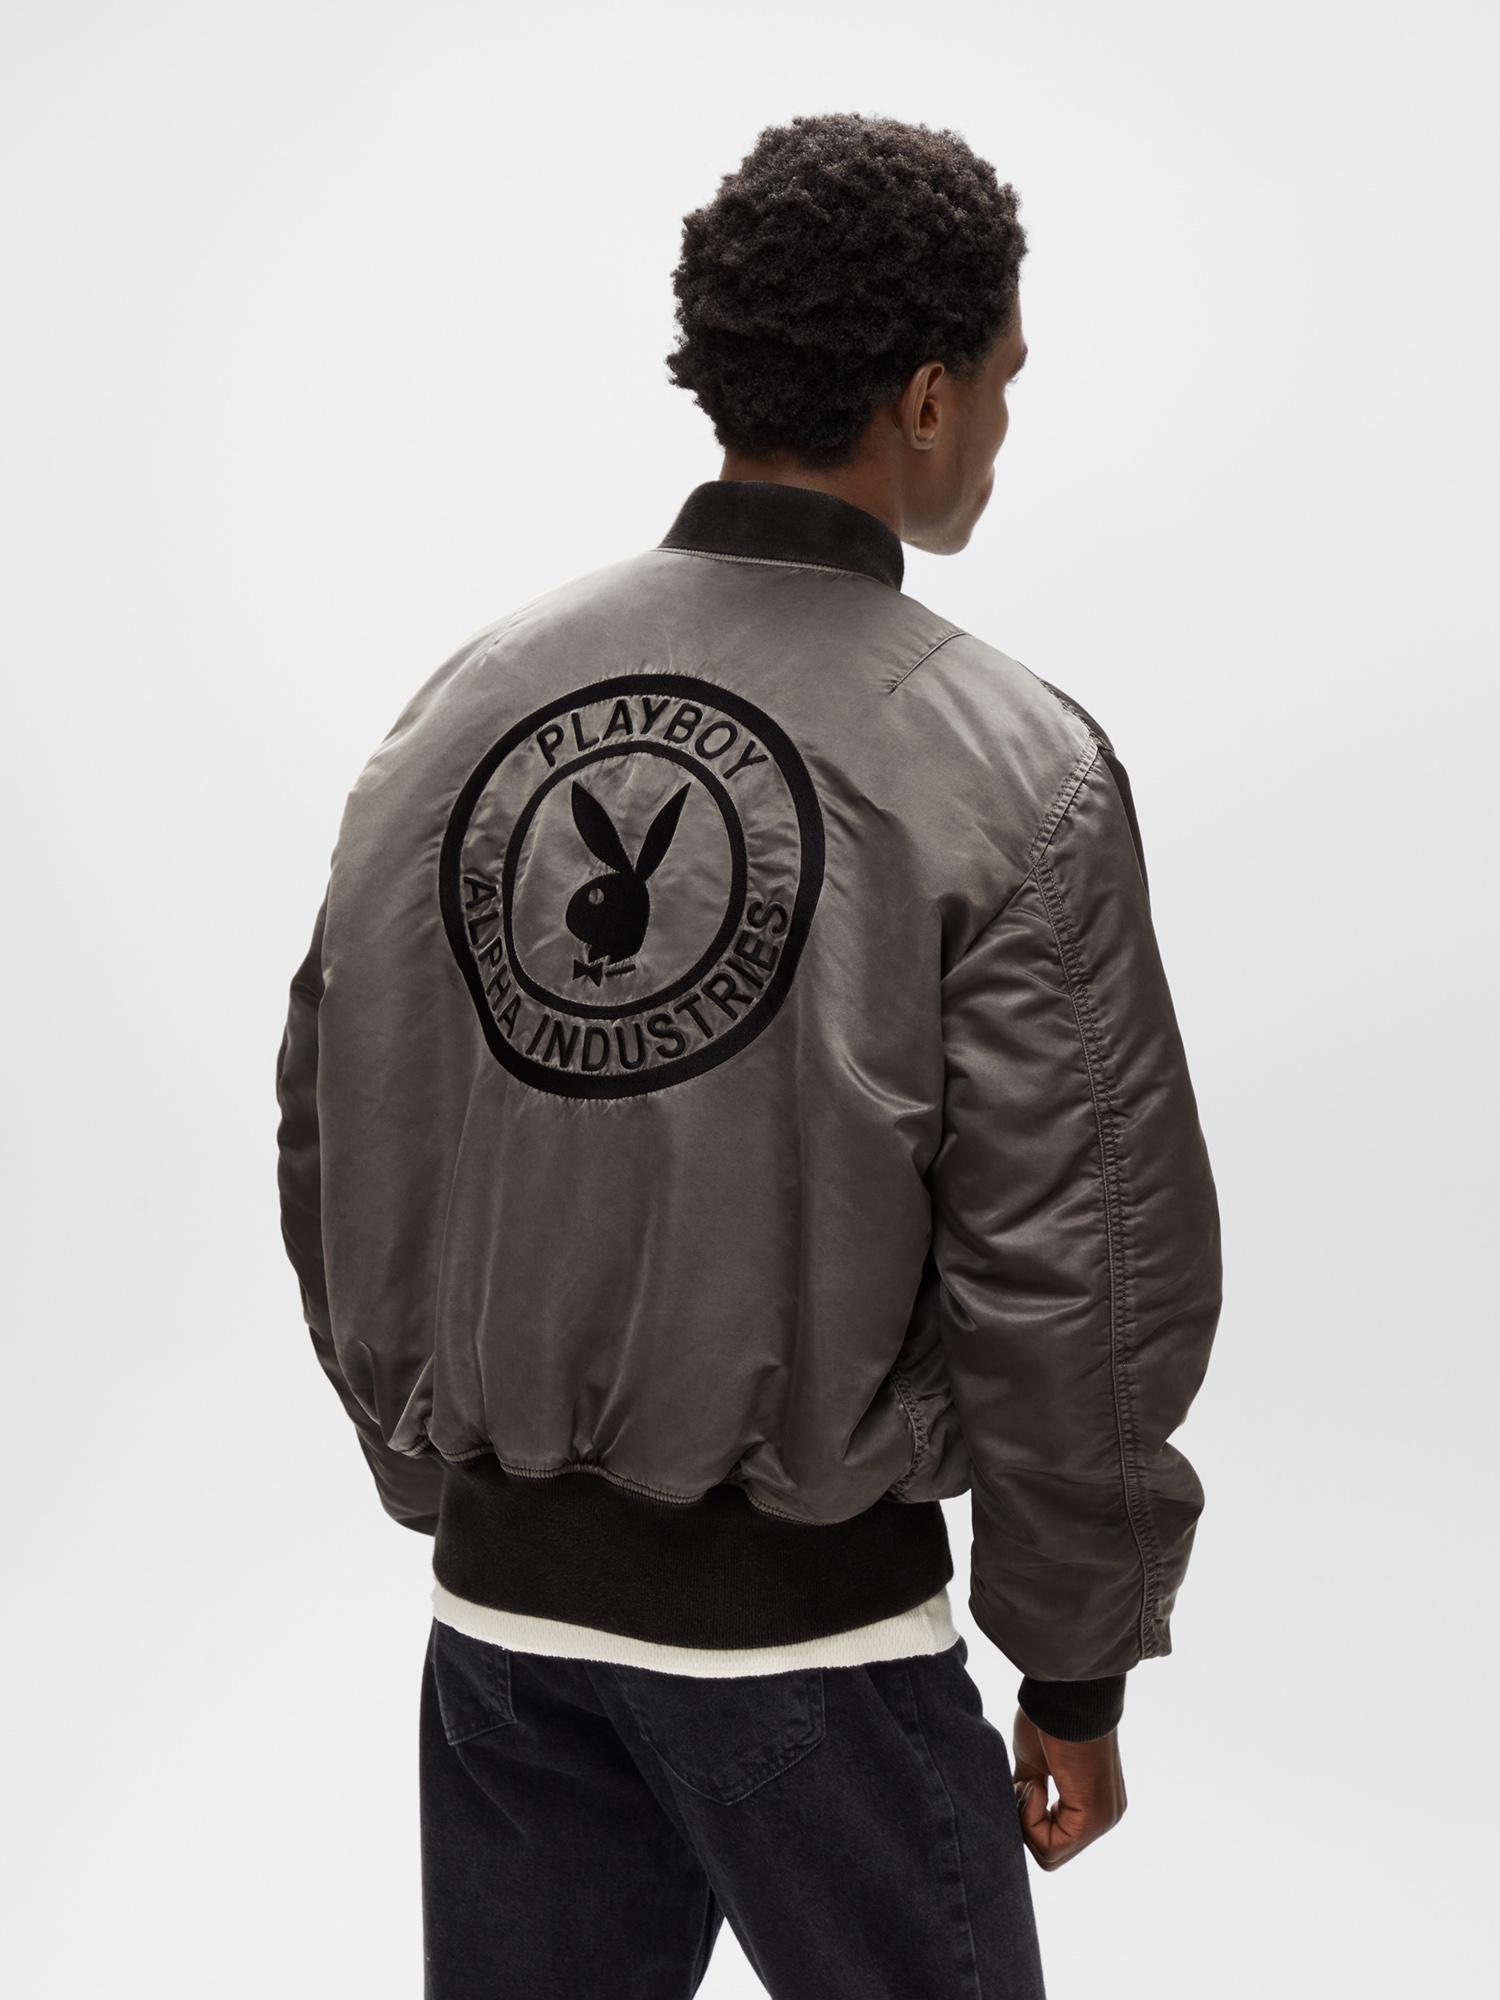 Alpha Industries Collaborates With Playboy